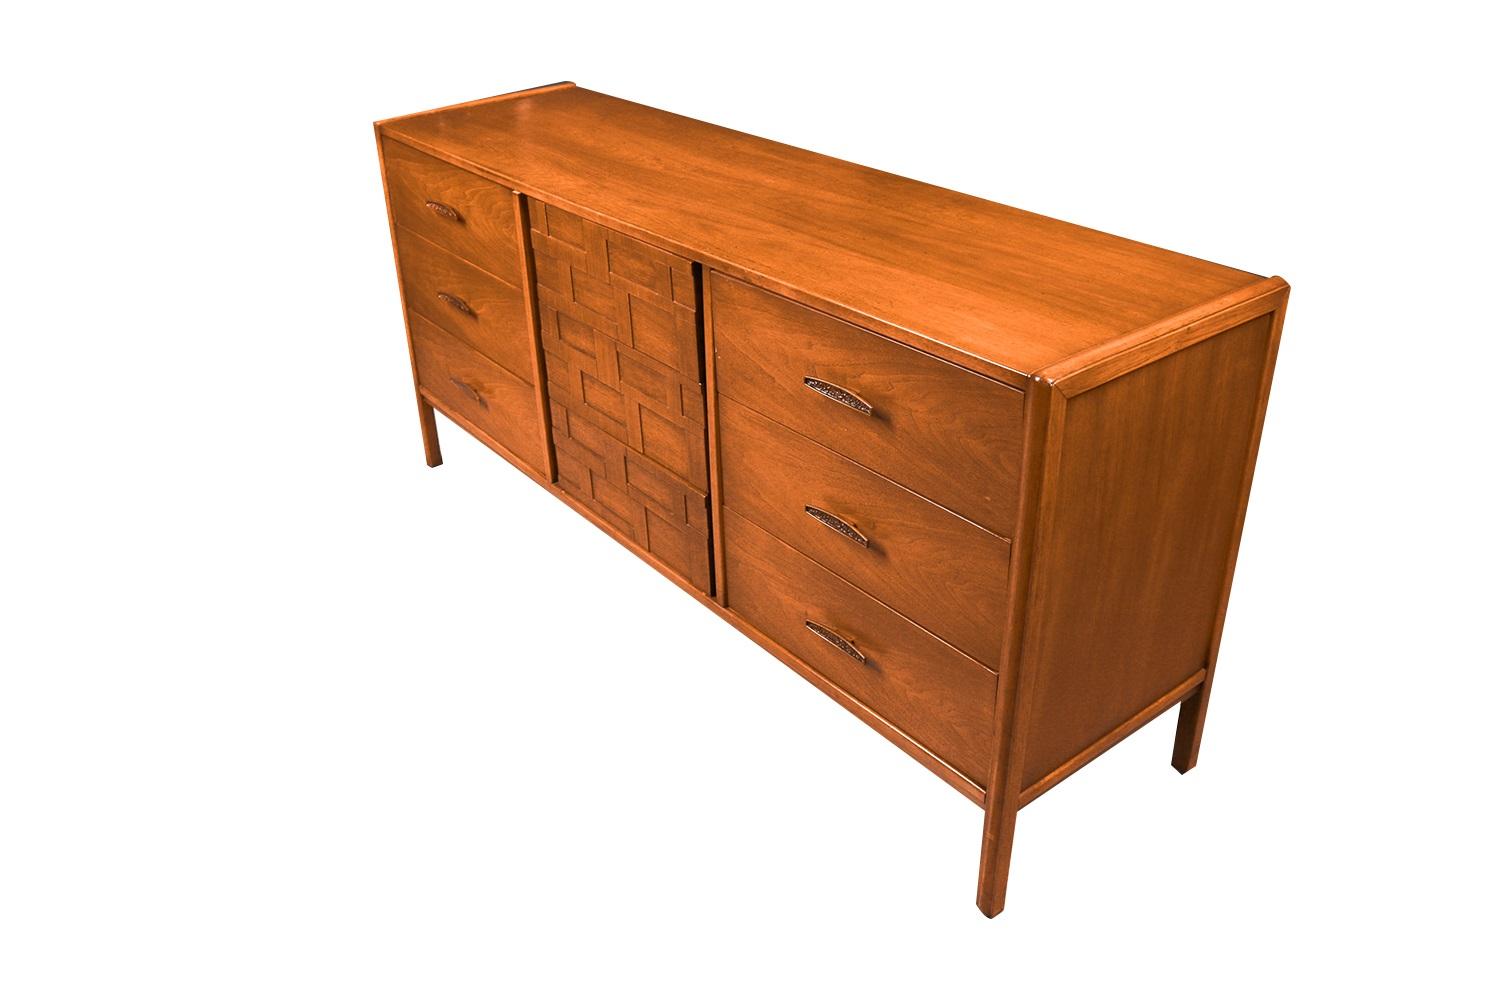 An elegant long nine drawer dresser. This is a beautiful example of Mid-Century craftsmanship. This retro piece was constructed with top of the line hardware, and excellently crafted woodwork. Features solid hardwood, with walnut and weave pattern